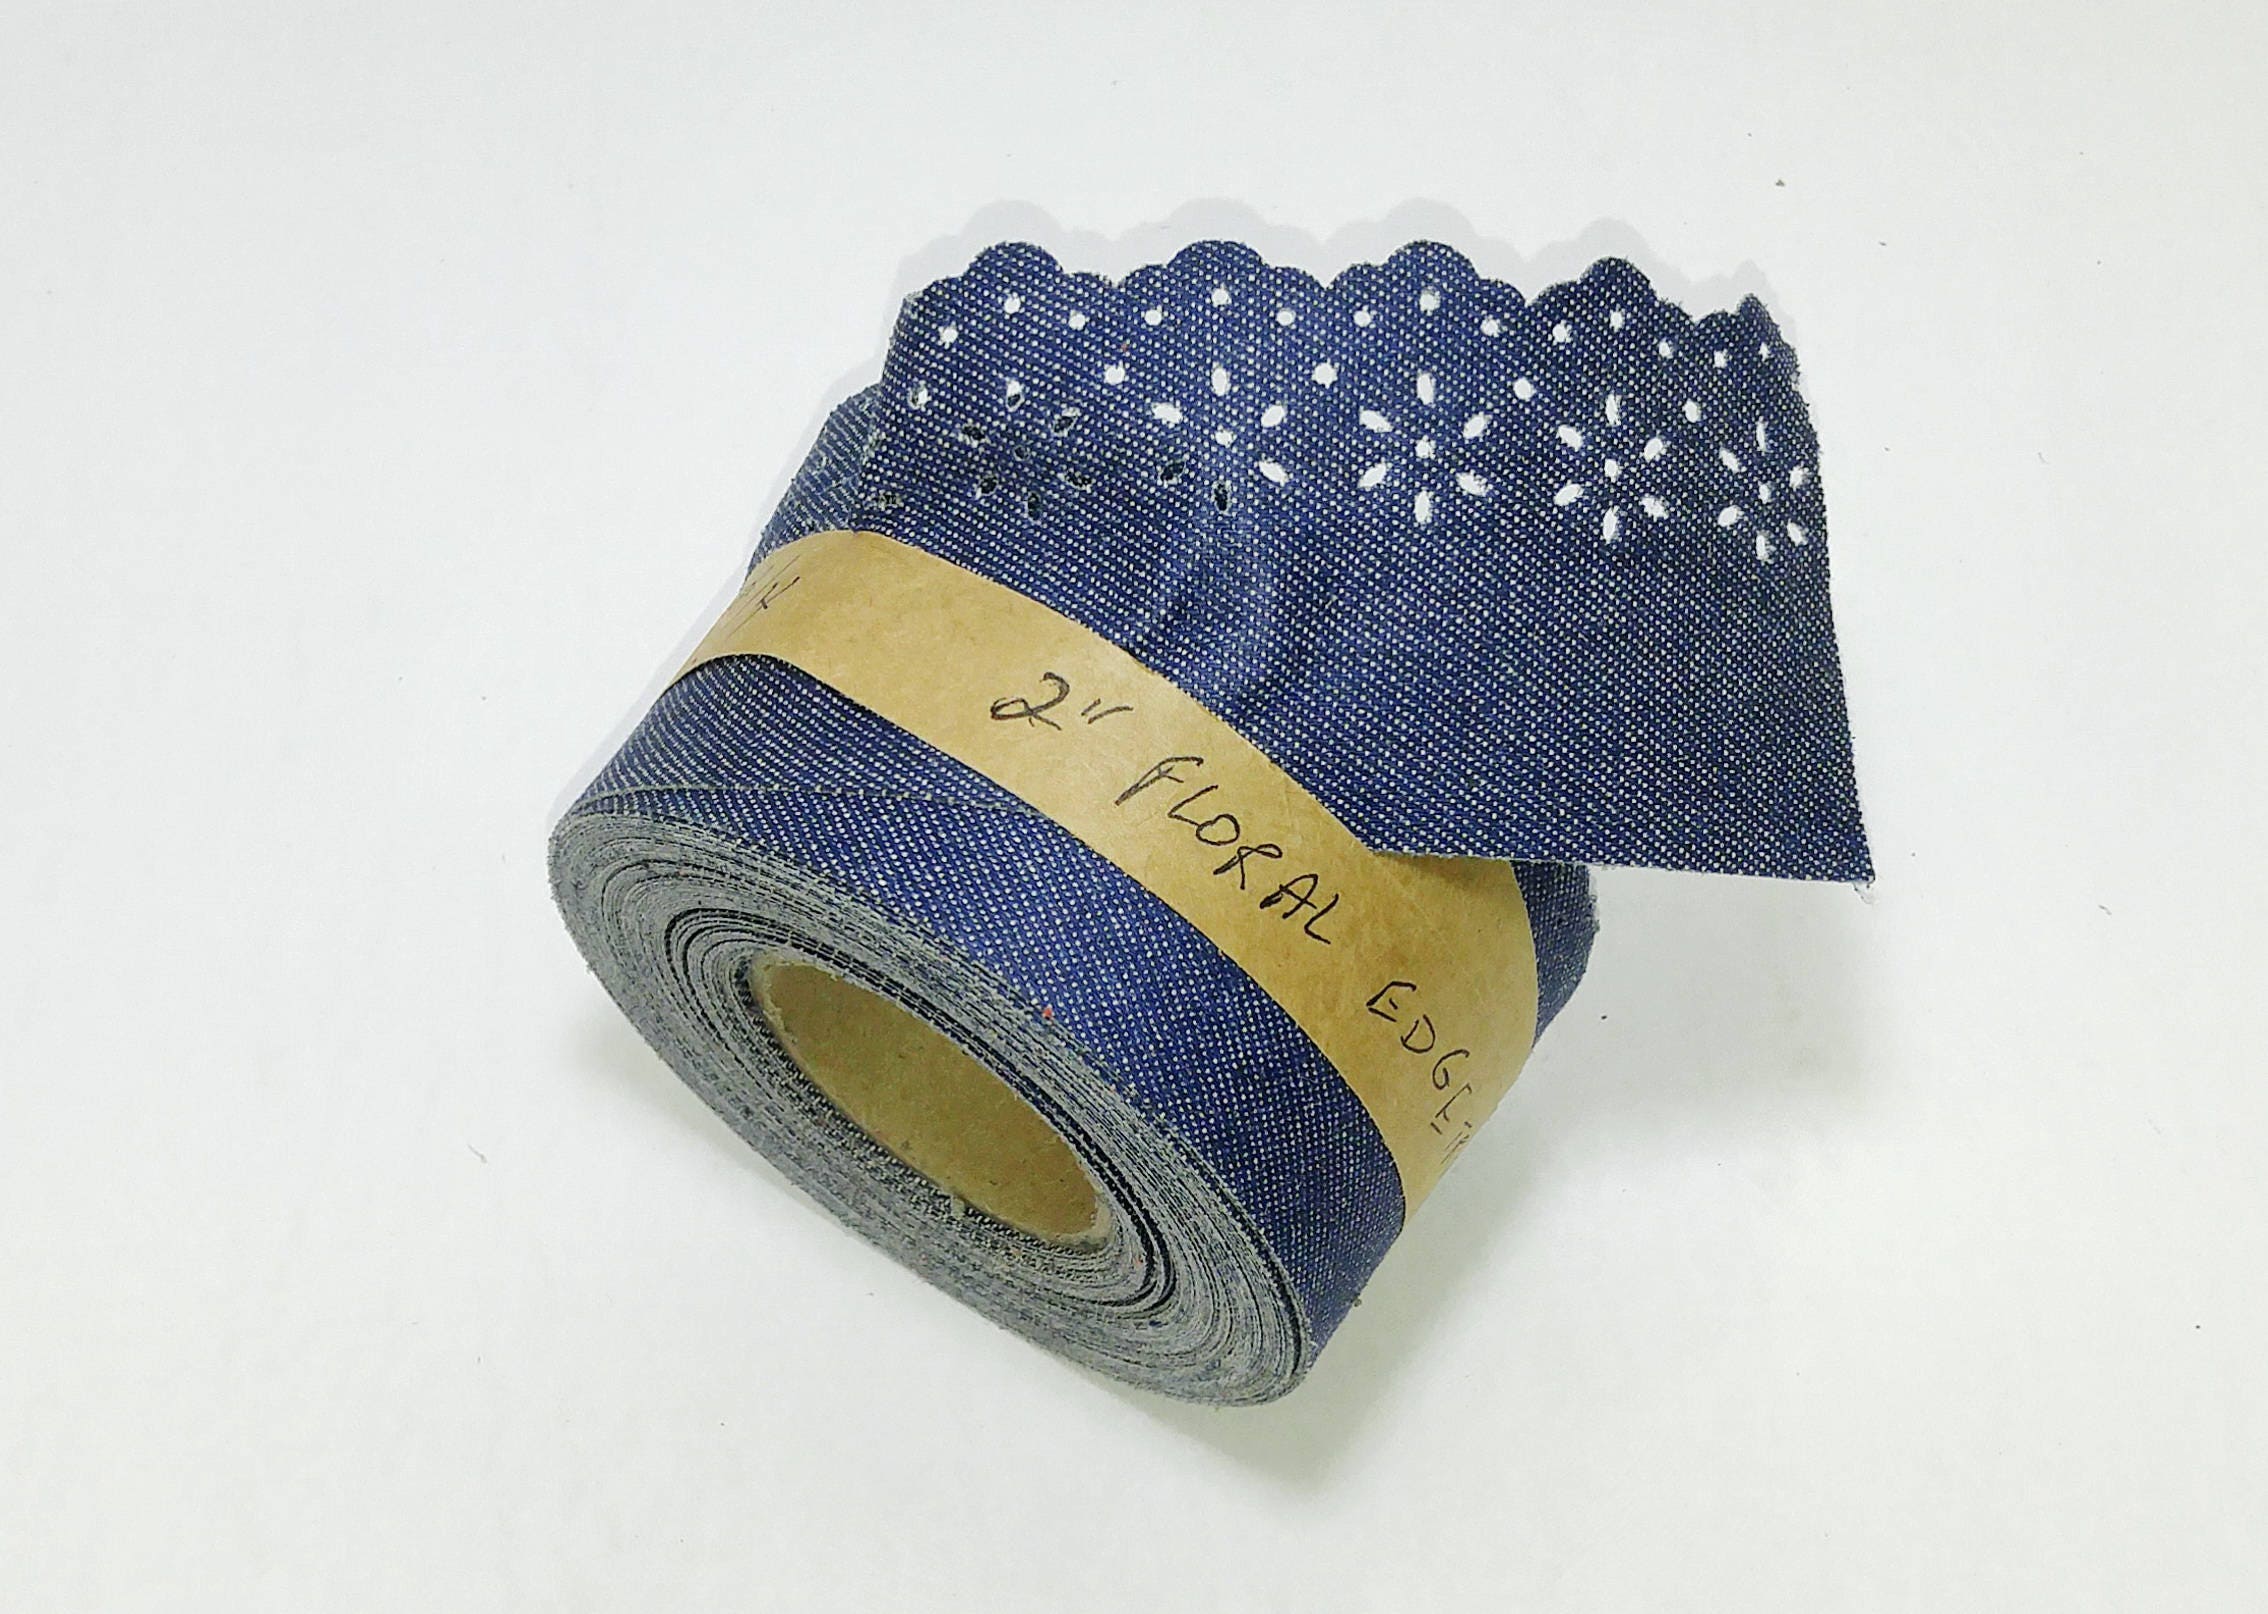 Denim Floral Trim Tape With Perforated and Scalloped Edge 2 Wide 3 YDS  3745XTDEN Trim Tape Decorative Sewing Crafting -  Canada